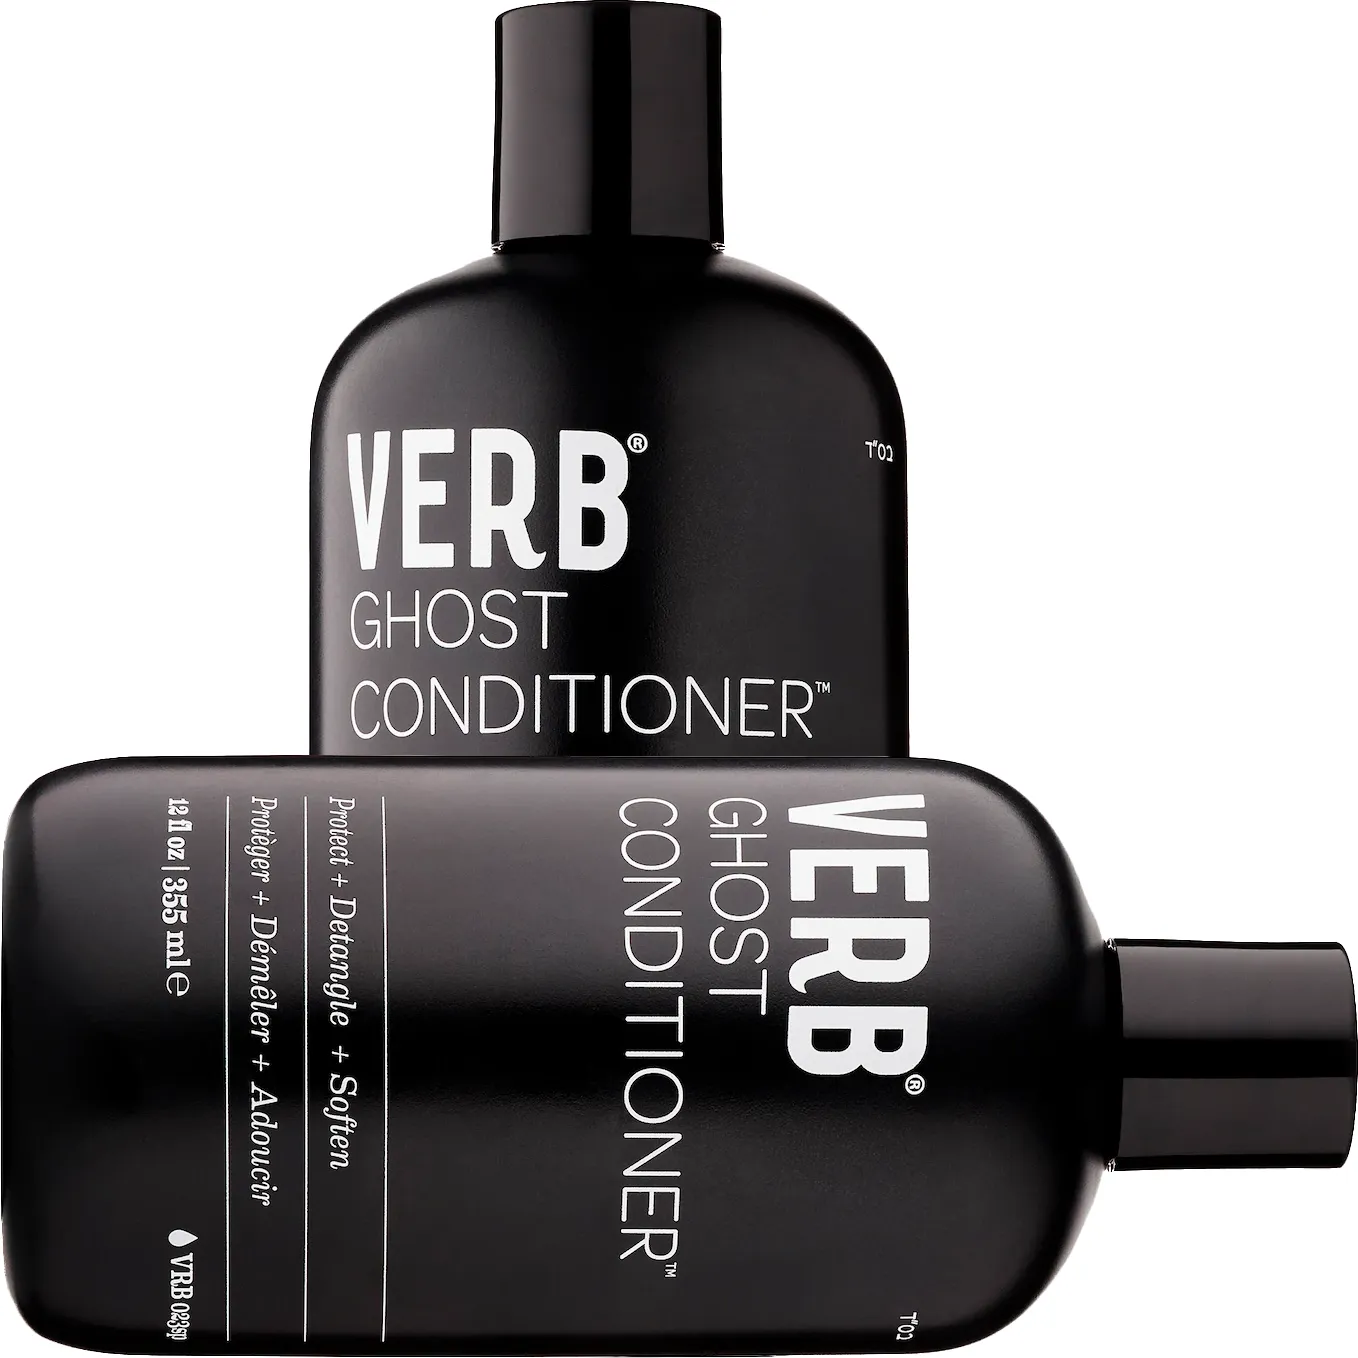 Free Verb Haircare Product Samples